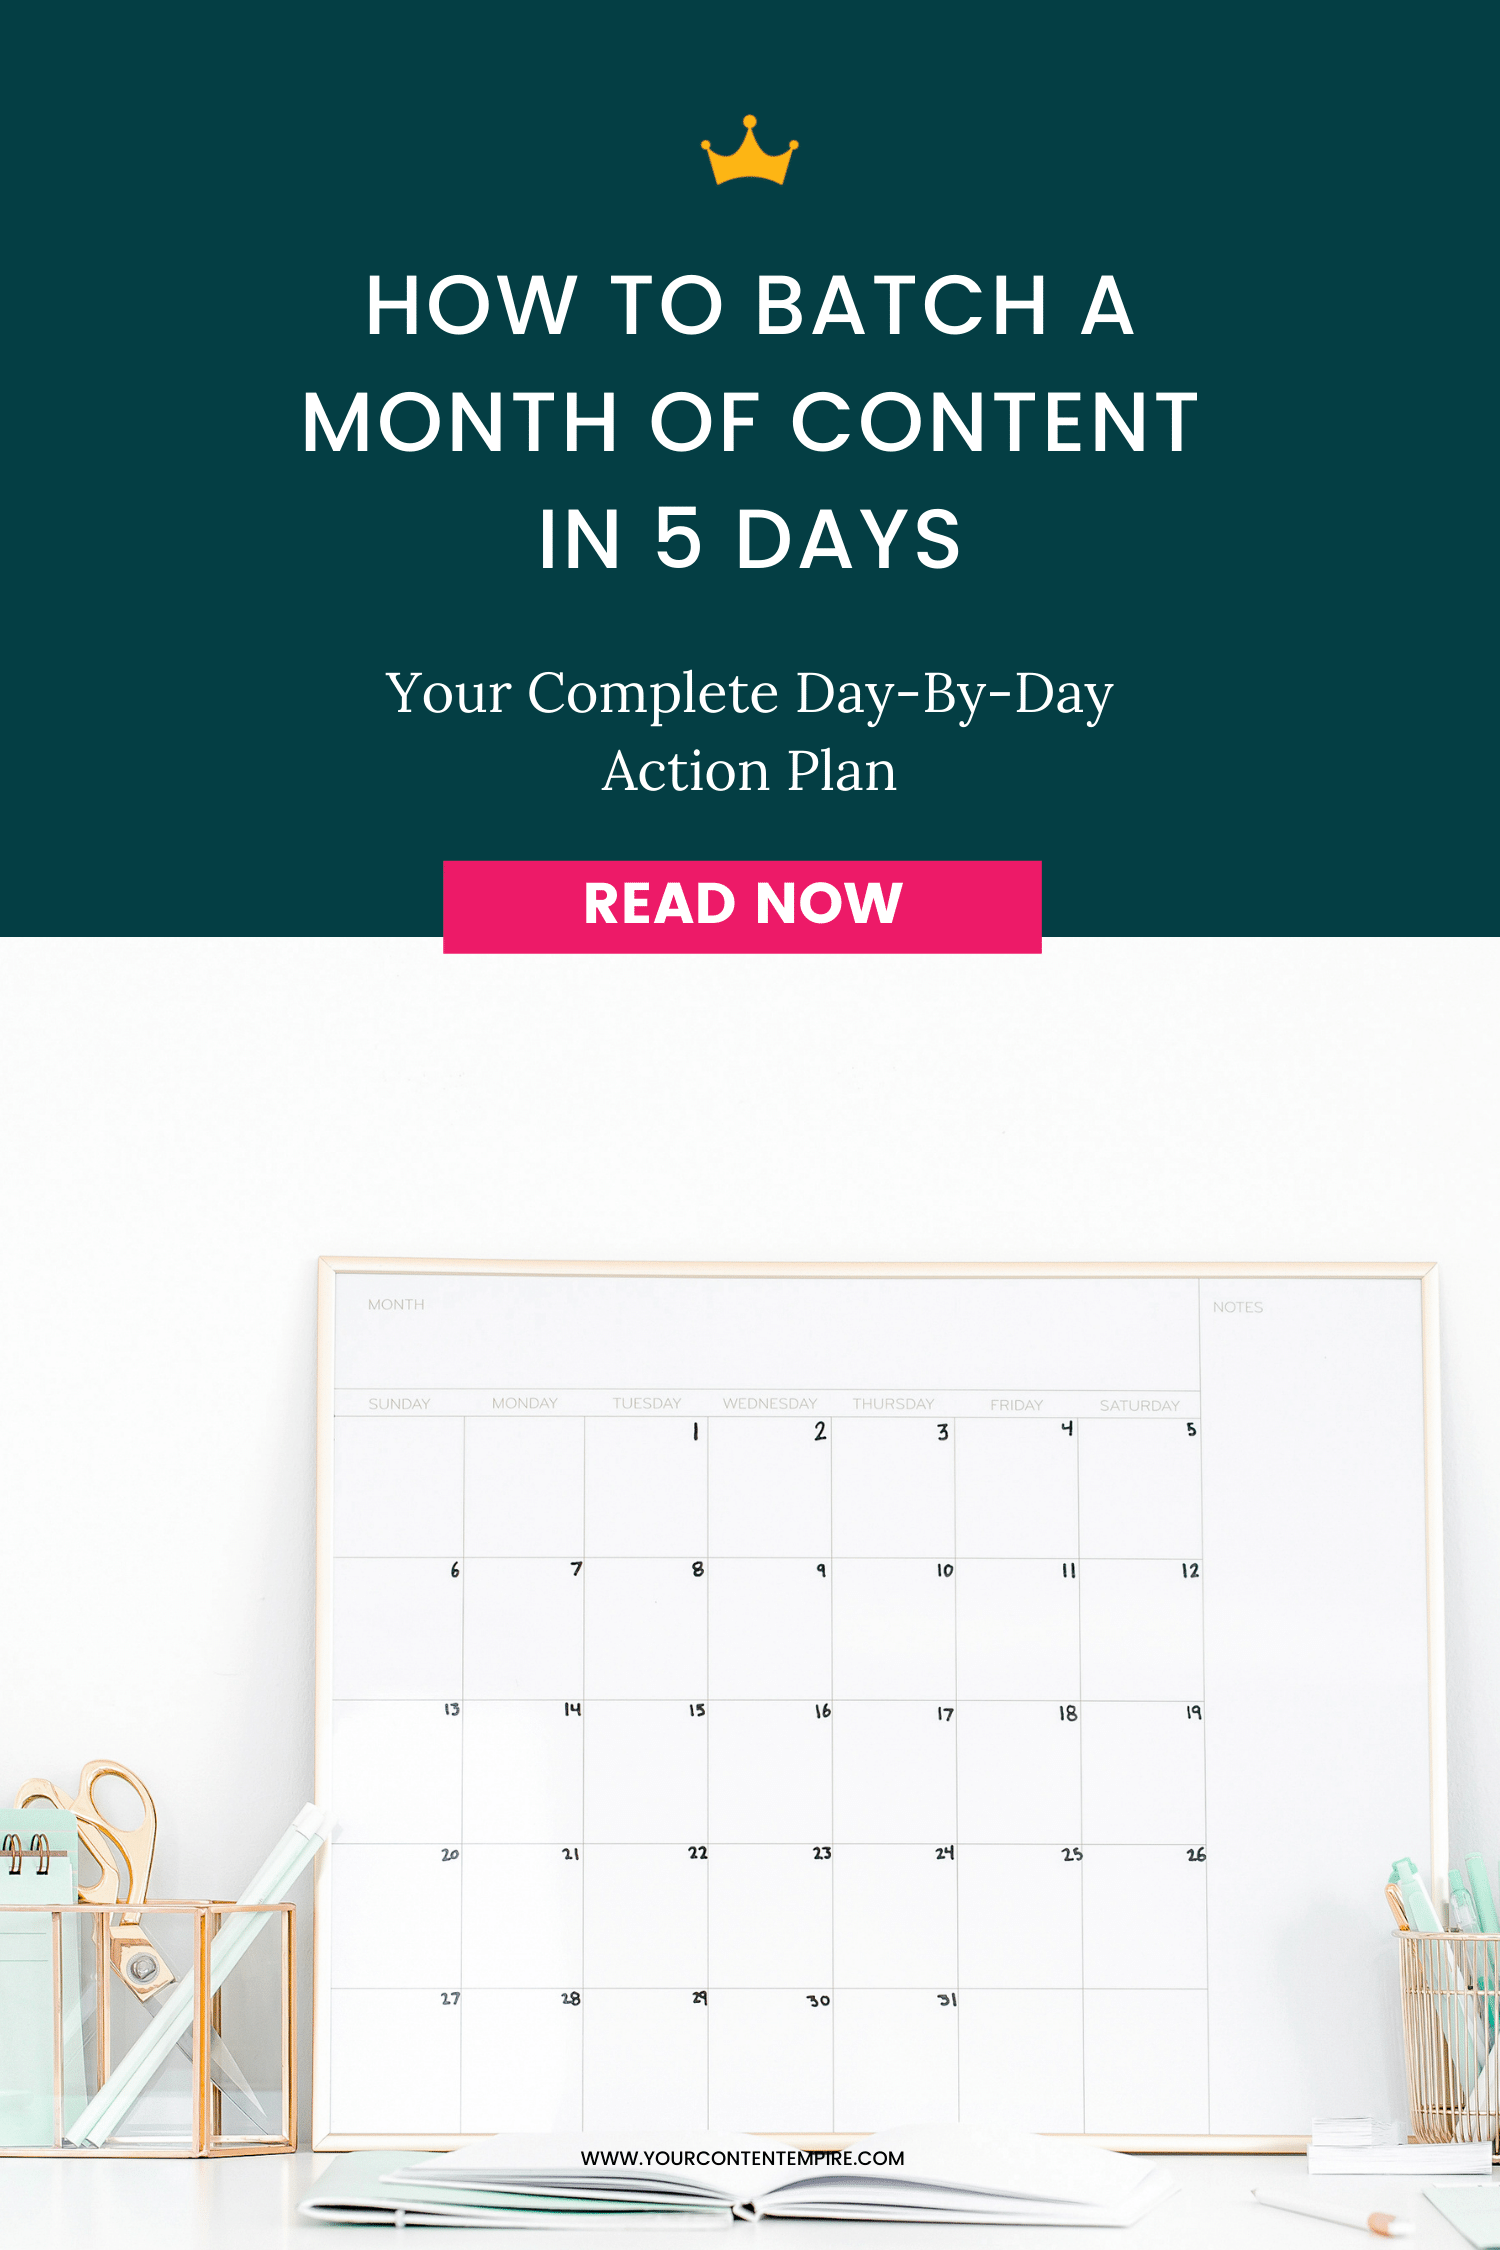 How to Batch a Month of Content in 5 Days